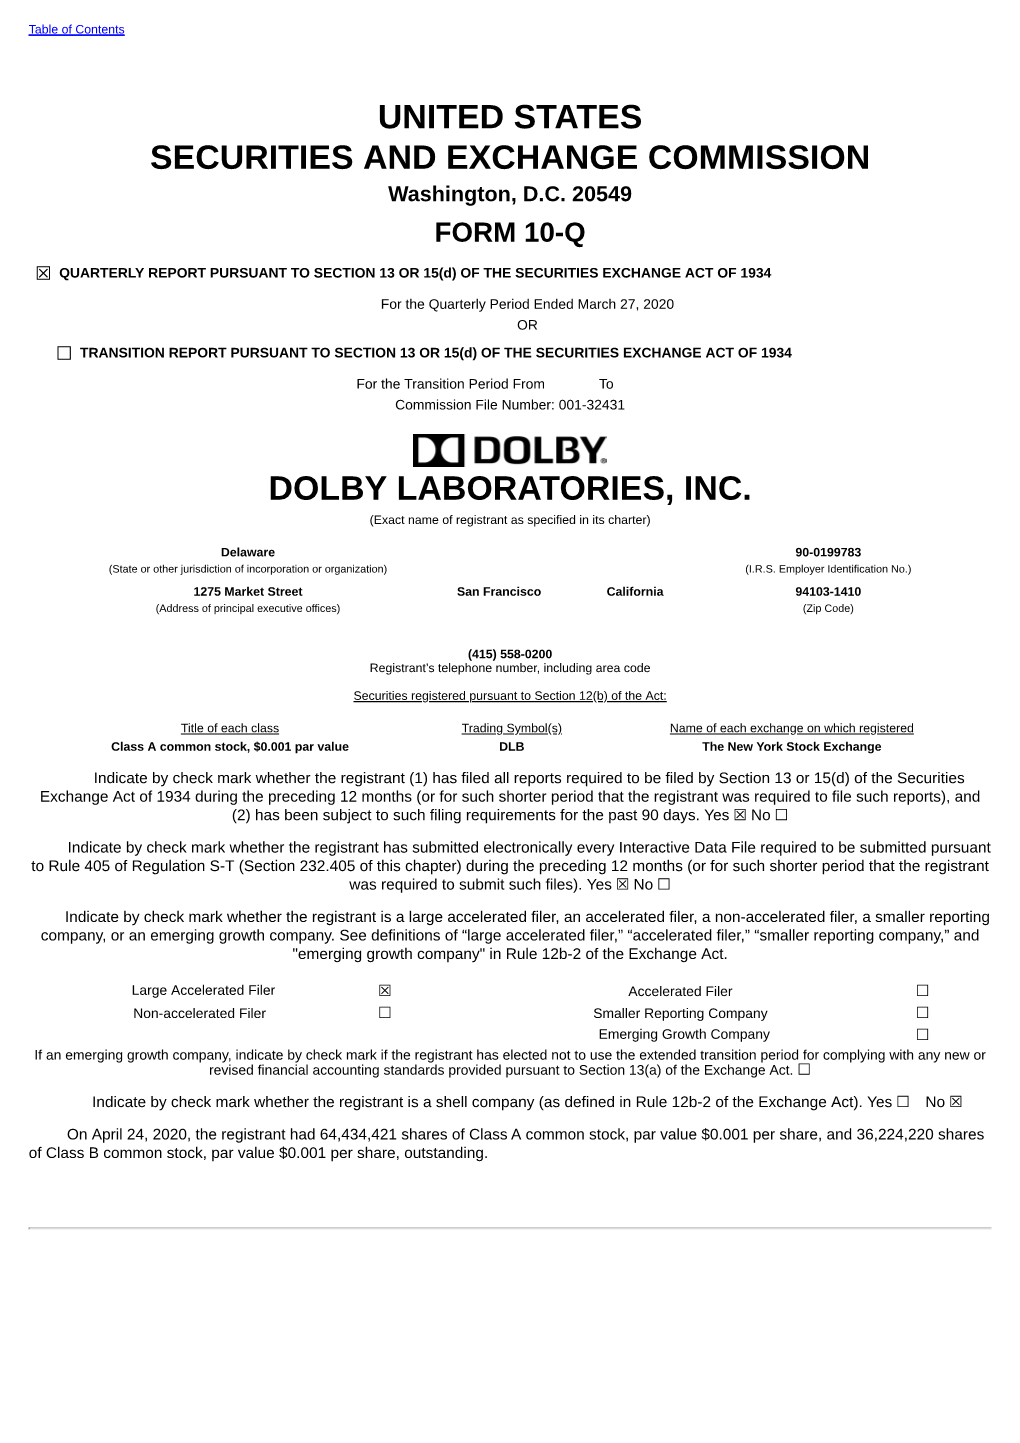 United States Securities and Exchange Commission Dolby Laboratories, Inc